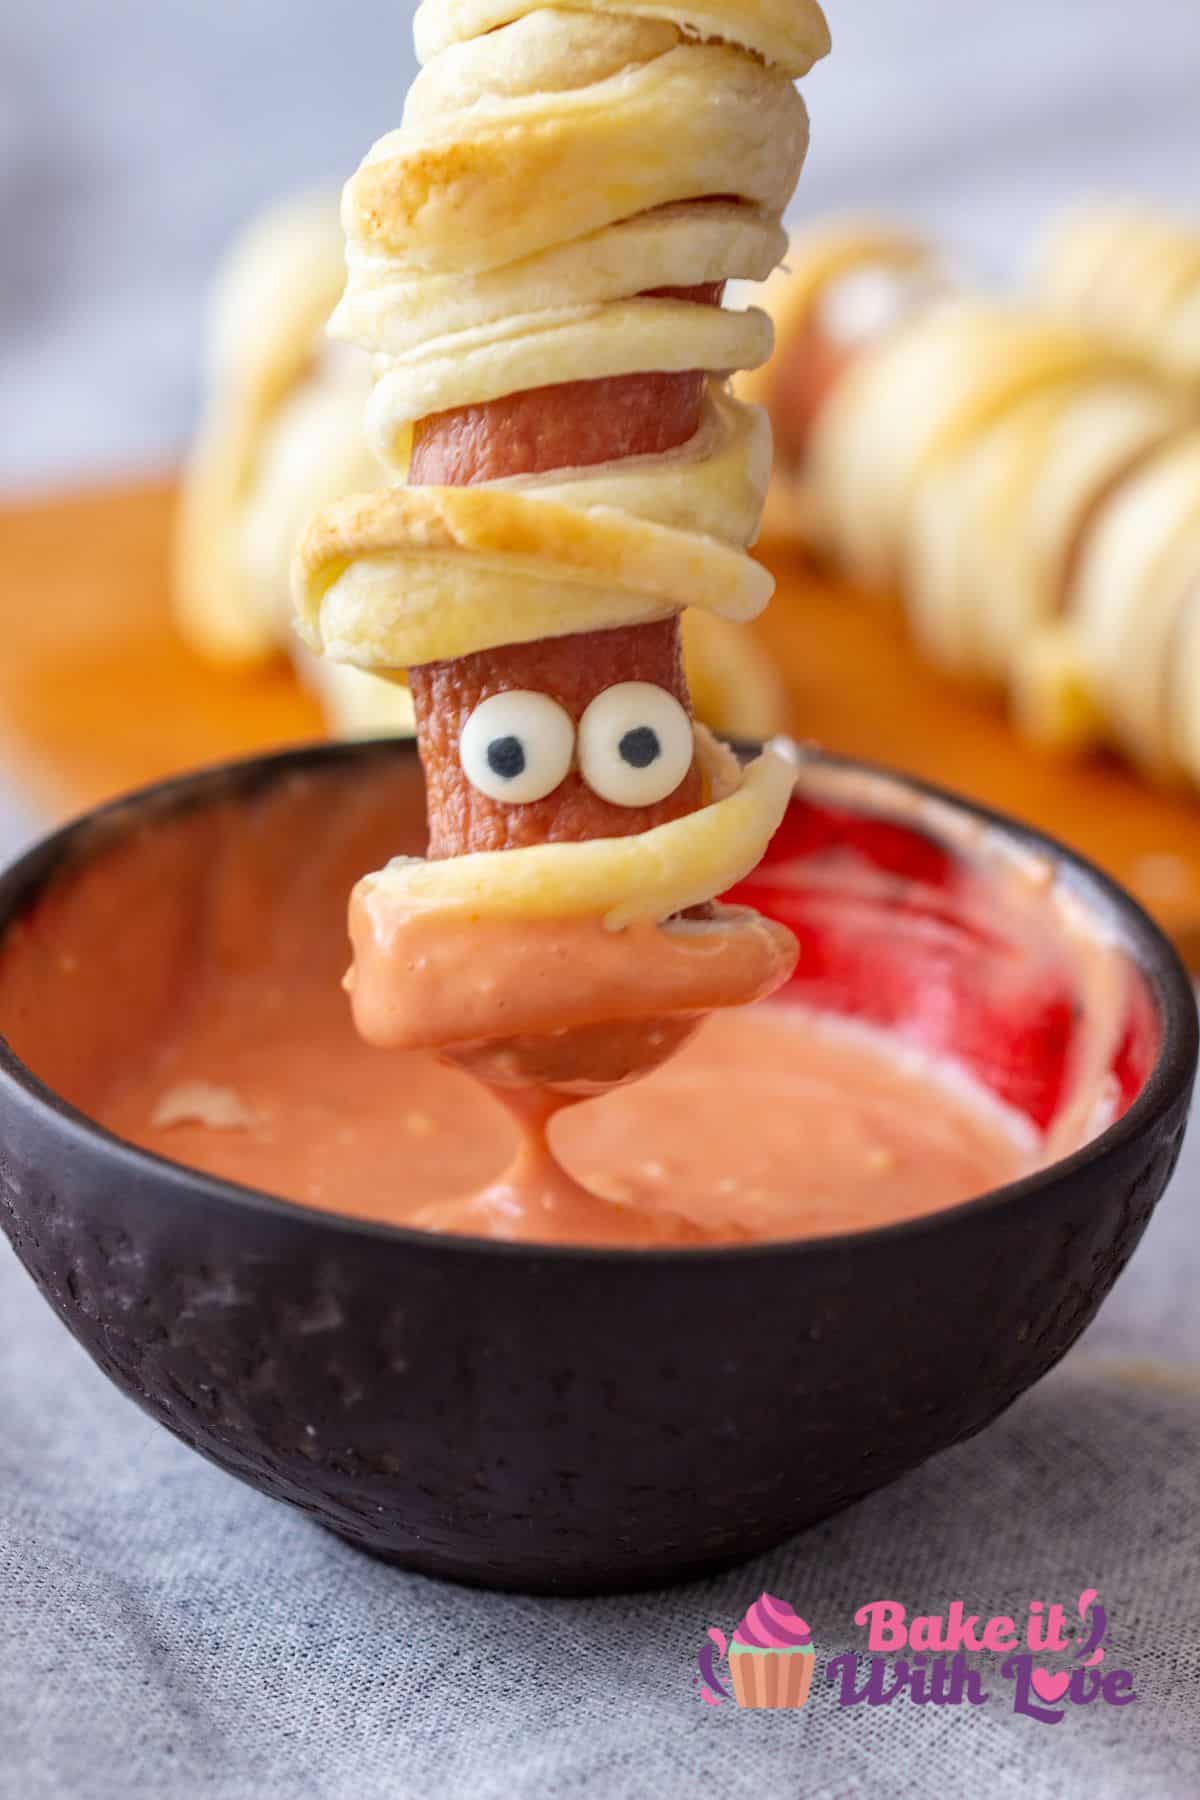 Tall image of "mummy dog" being dipped in sauce.